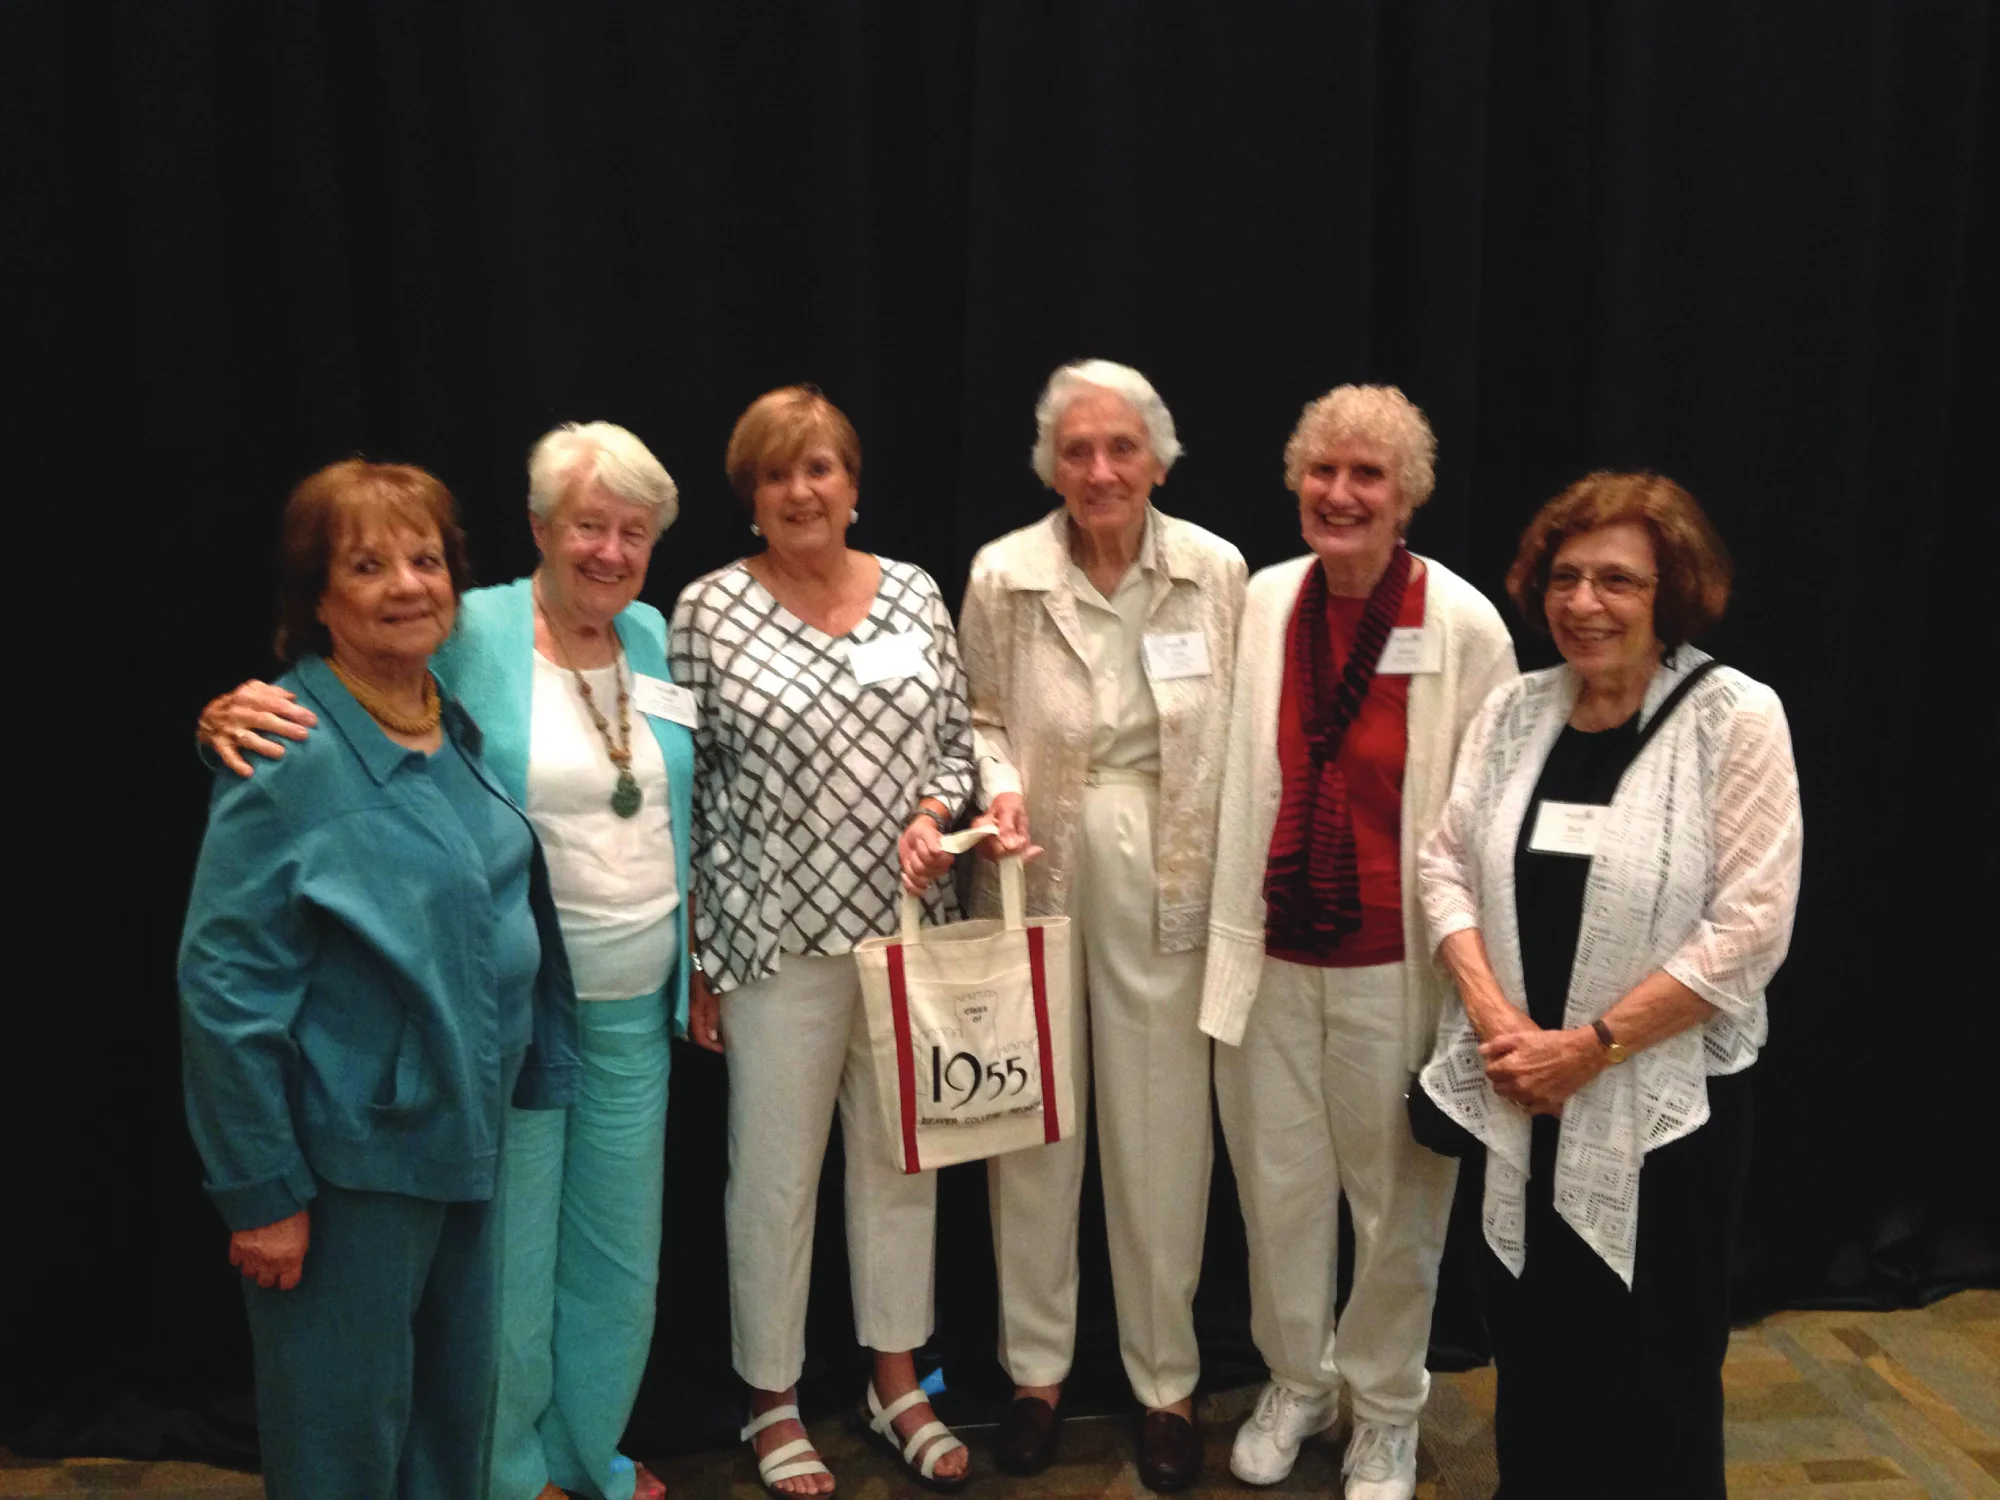 A group photo of several alumni students of the Class of 1955